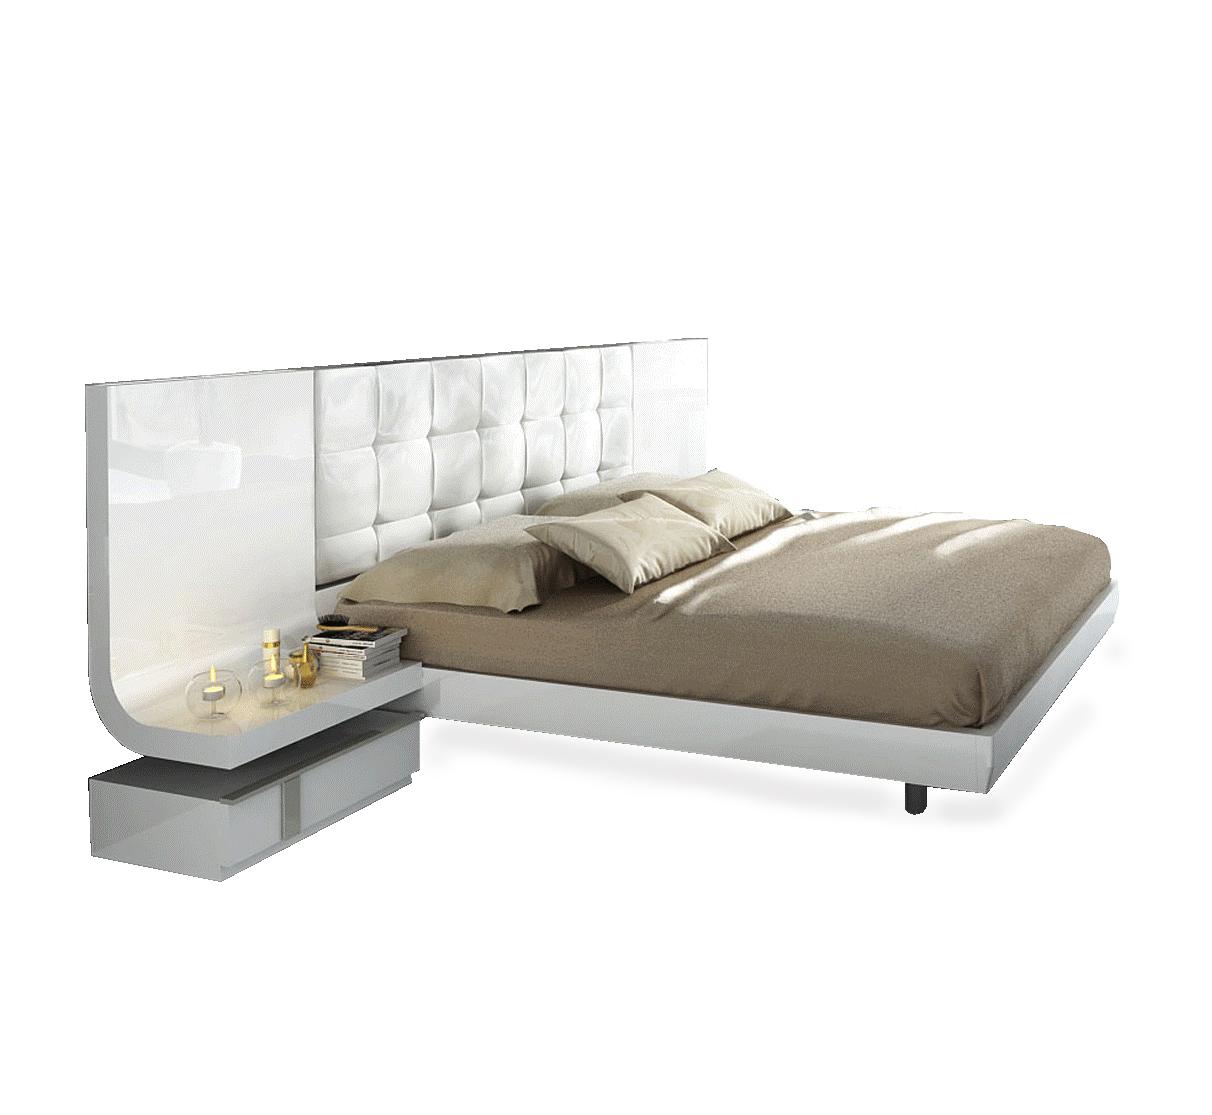 

    
Glossy White King Bedroom Set 3Pcs Contemporary Made in Spain ESF Granada
